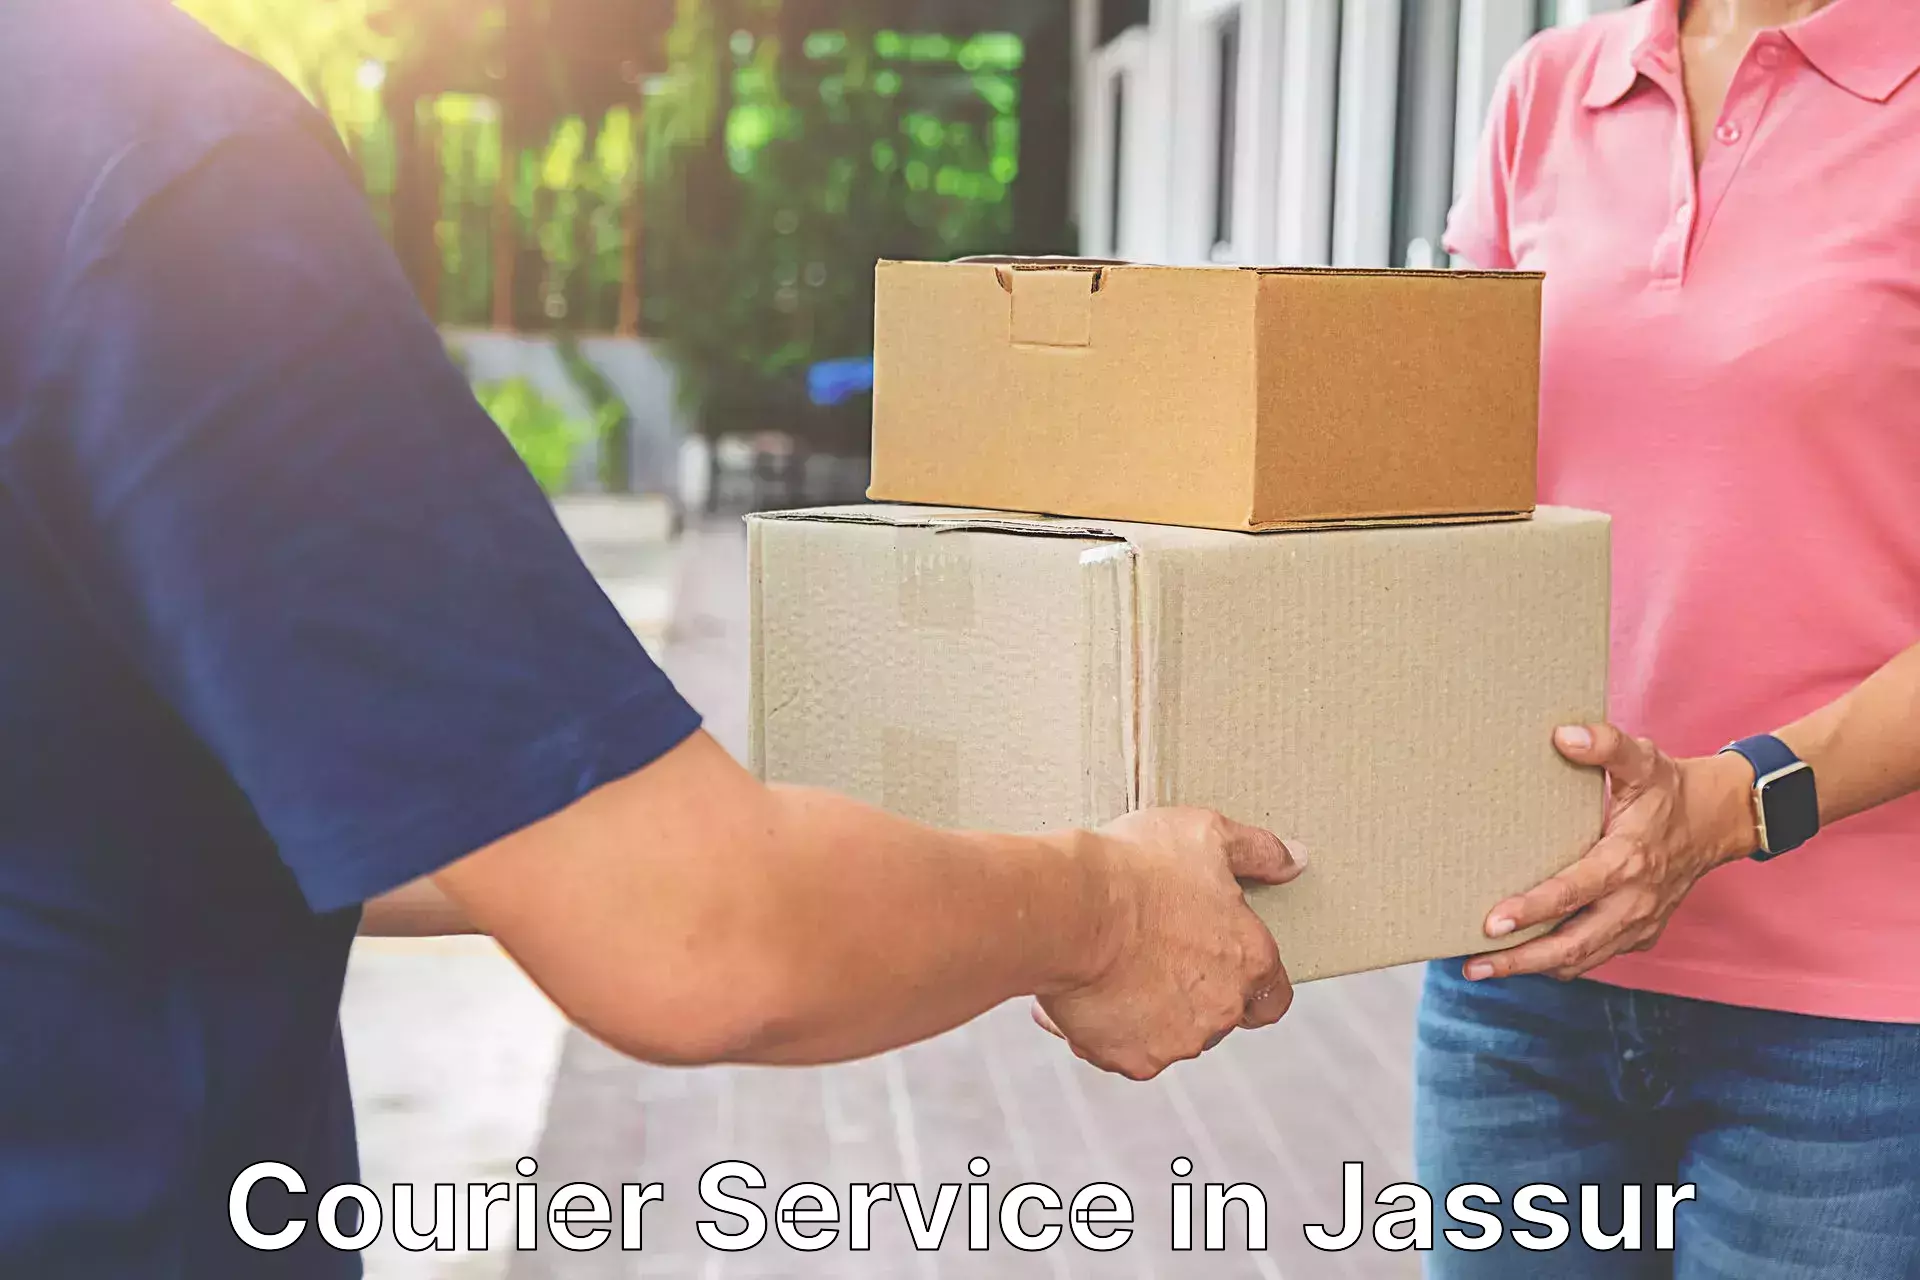 Personal parcel delivery in Jassur